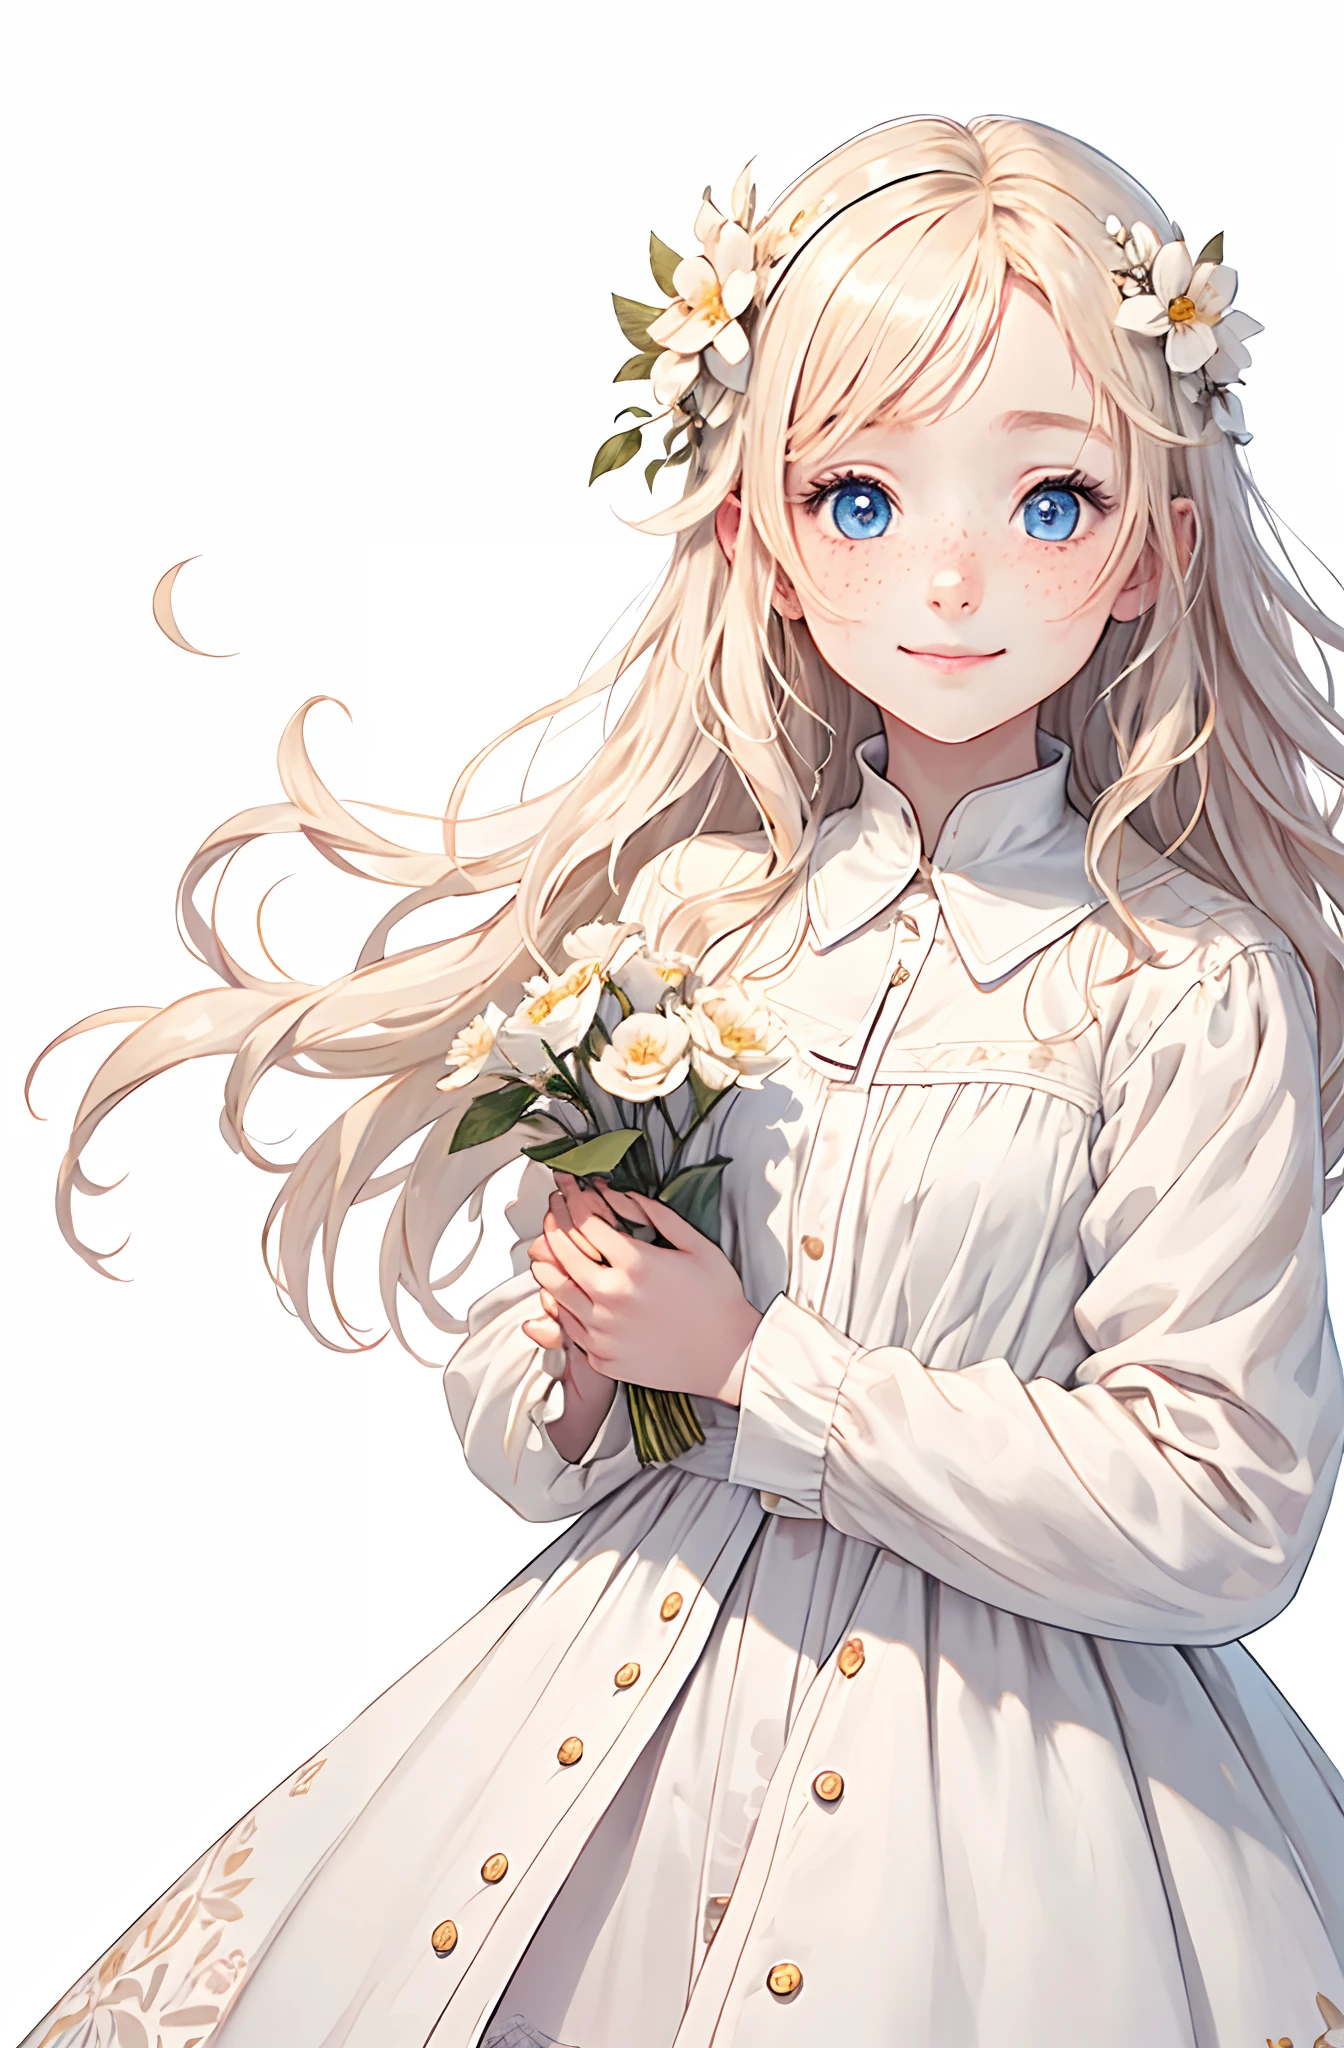 highest quality, pale skin, (face and eyes detail: 1.2), 1 girl, very delicate and beautiful girl, light blond, wavy short hair, blue eyes, snub nose, (slightly childish appearance), ((very beautiful)), (freckles: 0.4), curls, whole body, smile, happy, with white flowers, coat, white background, white world, she is standing, background is white, cute anime girl portraits, anime visual of a cute girl, anime girl in white dress with flowers in hair, crisp clear rpg portrait,